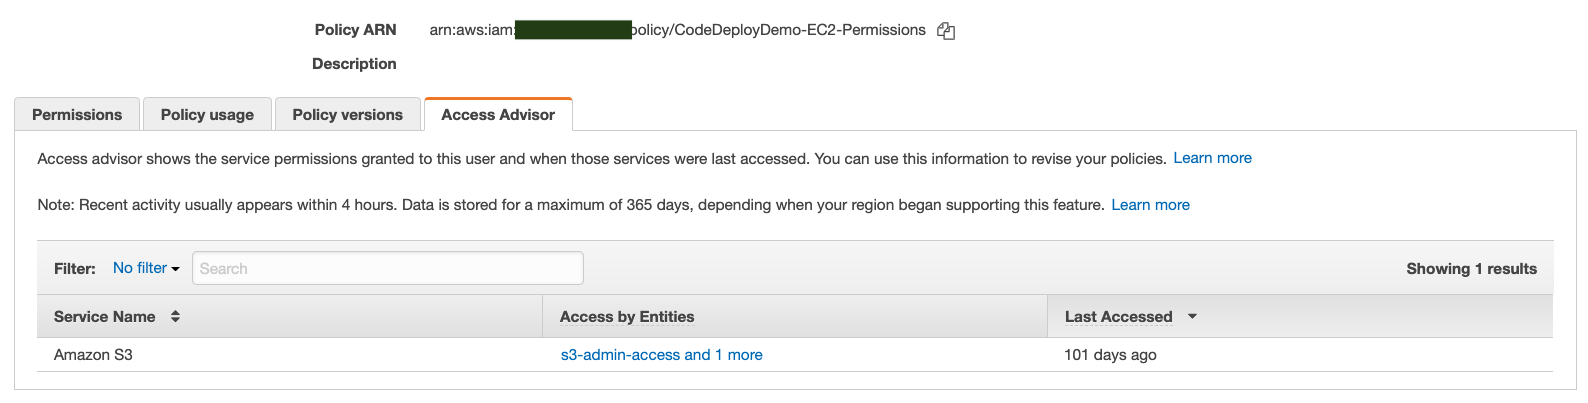 Policy ARN —_arn:aws:iamn EEE olicy/CodeDeployDemo-EC2-Permissions (2)

Description

Permissions  Policyusage Policy versions += Access Advisor

Access advisor shows the service permissions granted to this user and when those services were last accessed. You can use this information to revise your policies. Learn more

Note: Recent activity usually appears within 4 hours. Data is stored for a maximum of 365 days, depending when your region began supporting this feature. Learn more

Filter: No filter ~

Service Name + Access by Entities Last Accessed ~

‘Amazon $3 s8-admin-access and 1 more 101 days ago

Showing 1 results